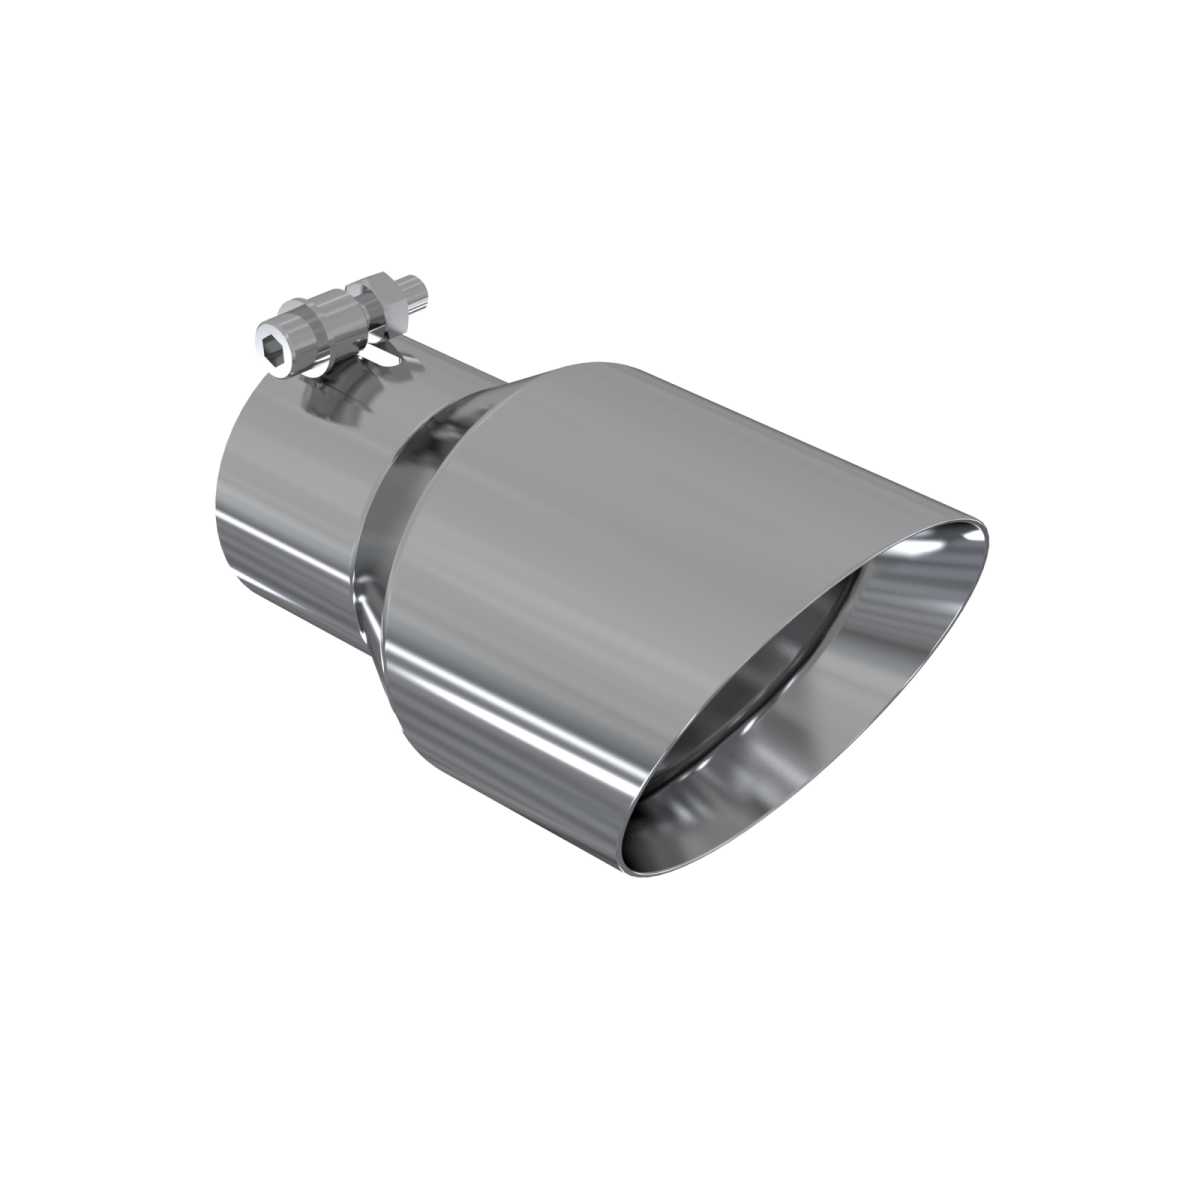 MBRP - MBRP Exhaust Tip 4.5 Inch O.D. Dual Wall Angled 3 Inch Inlet 7.7 Inch Length T304 Stainless Steel T5151